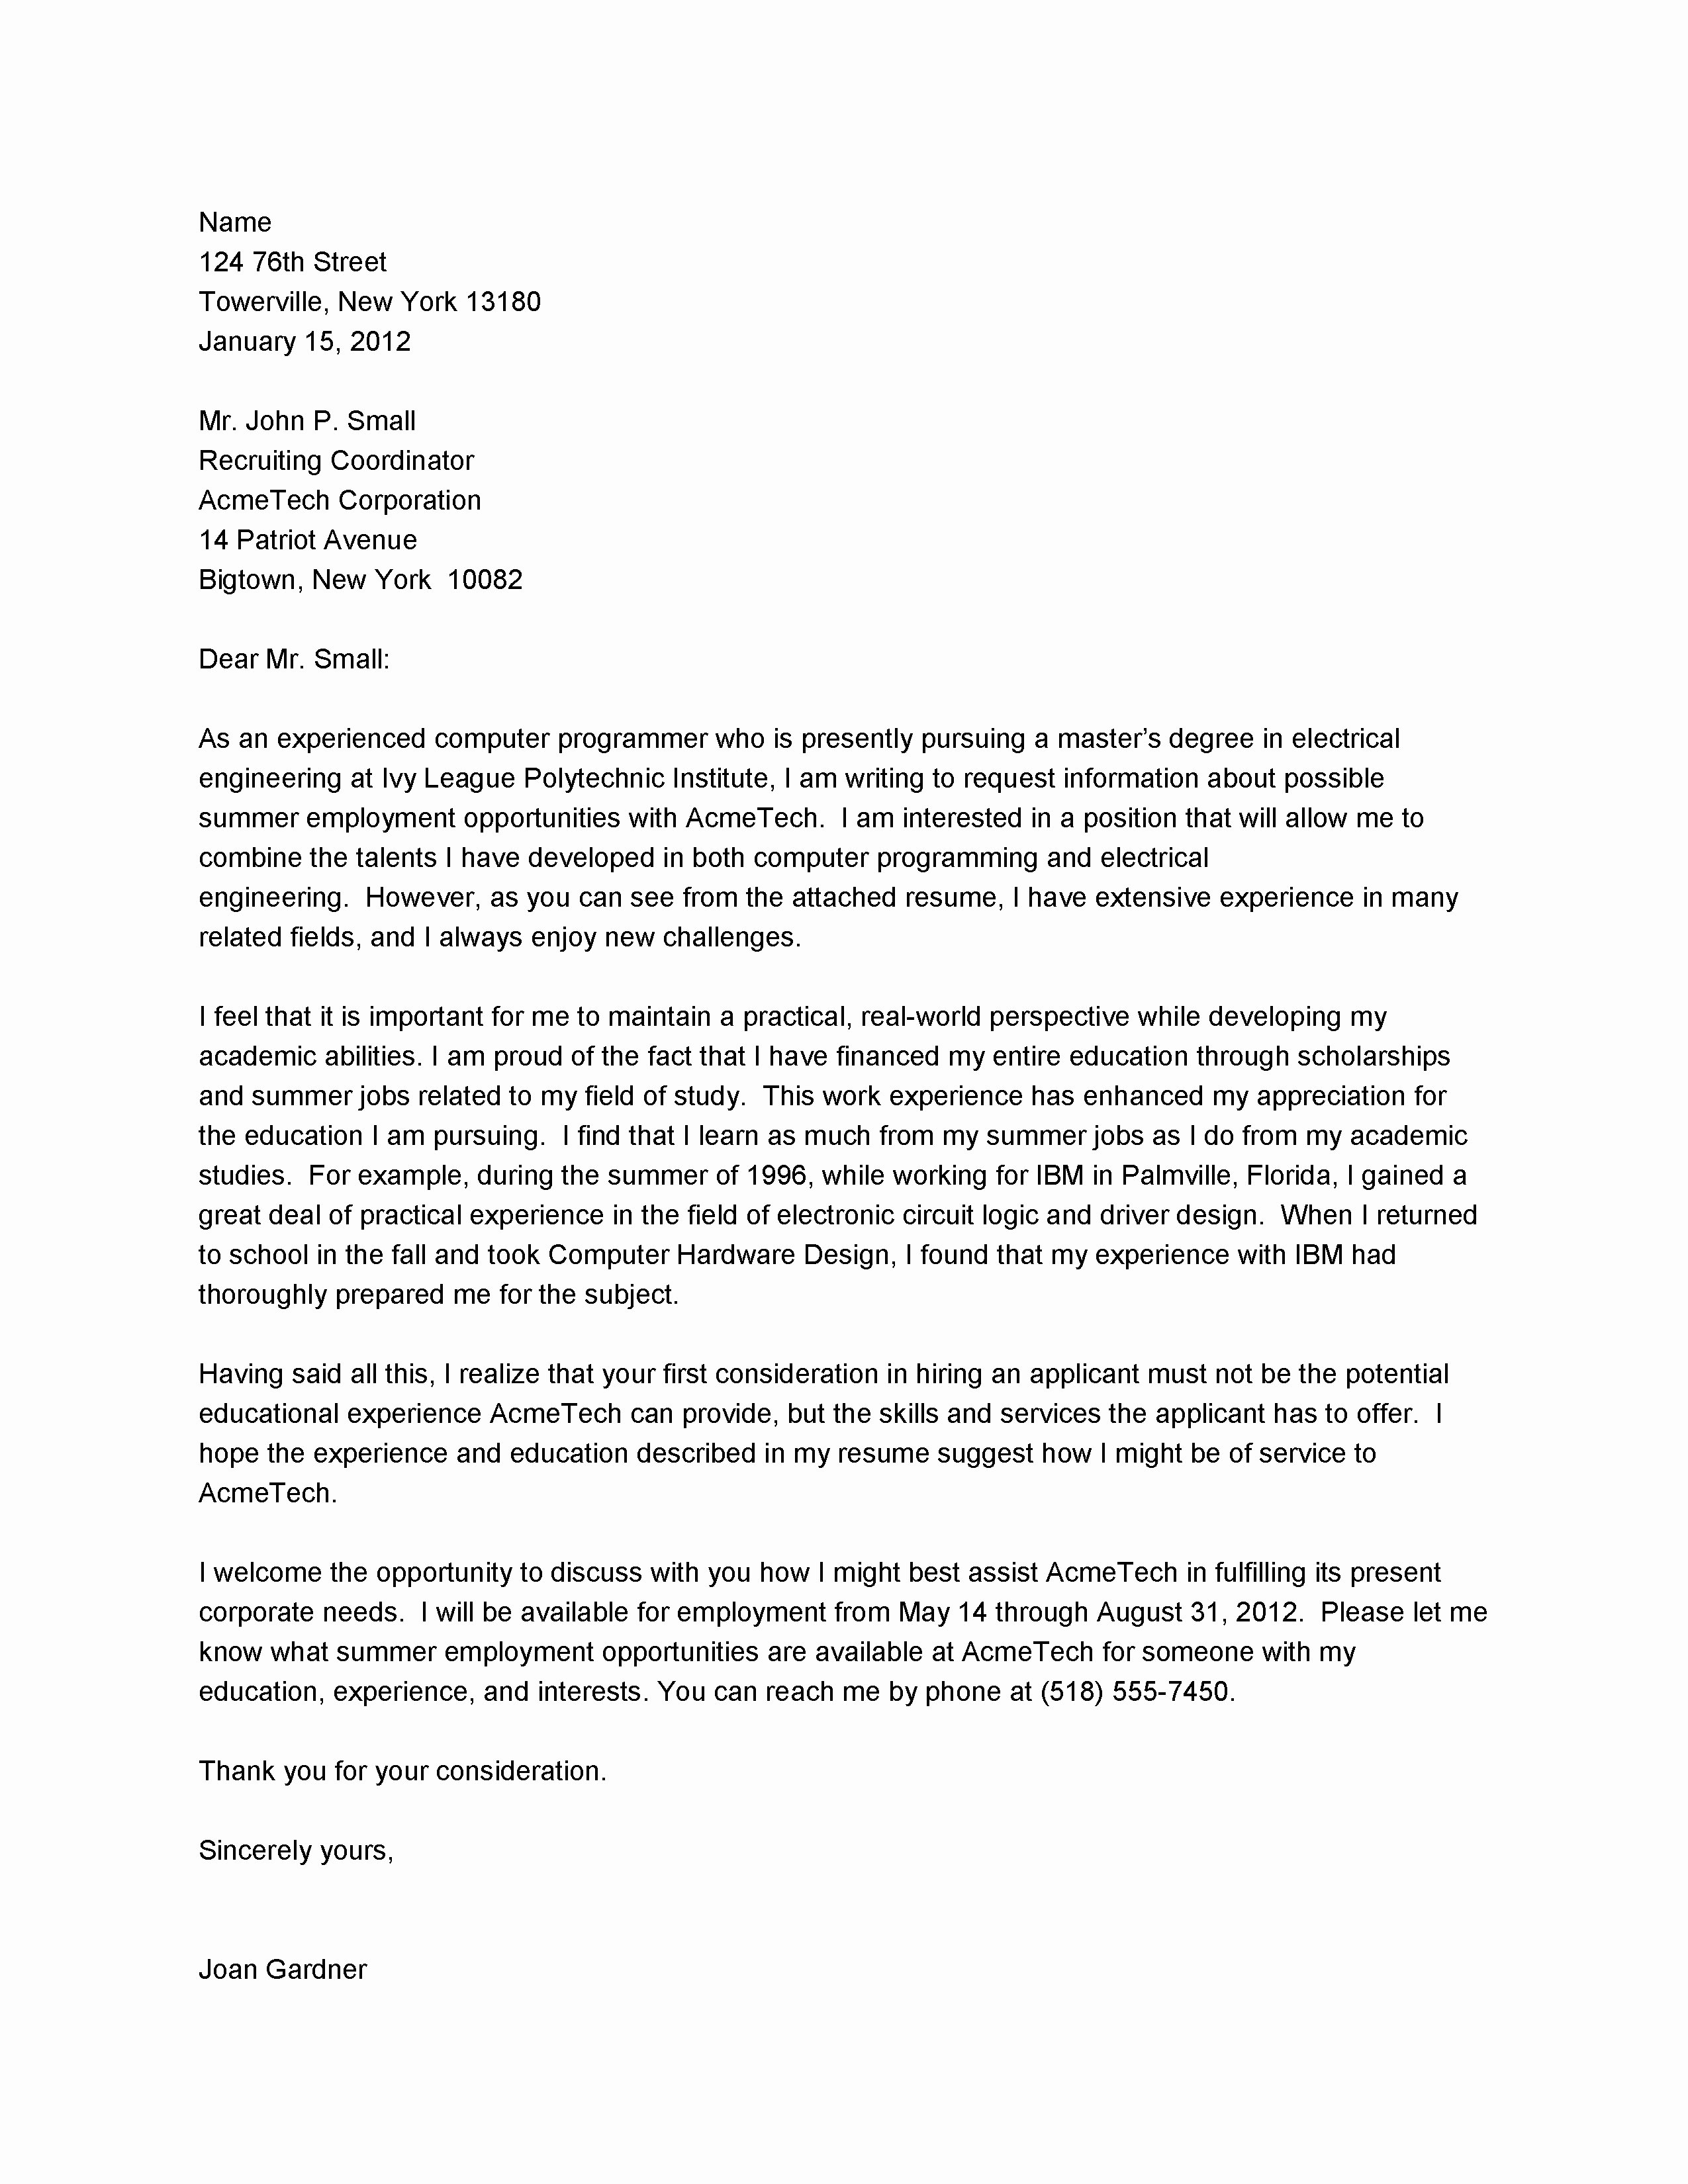 Engineering Internship Cover Letter New Example Cover Letter for Electrical Engineer